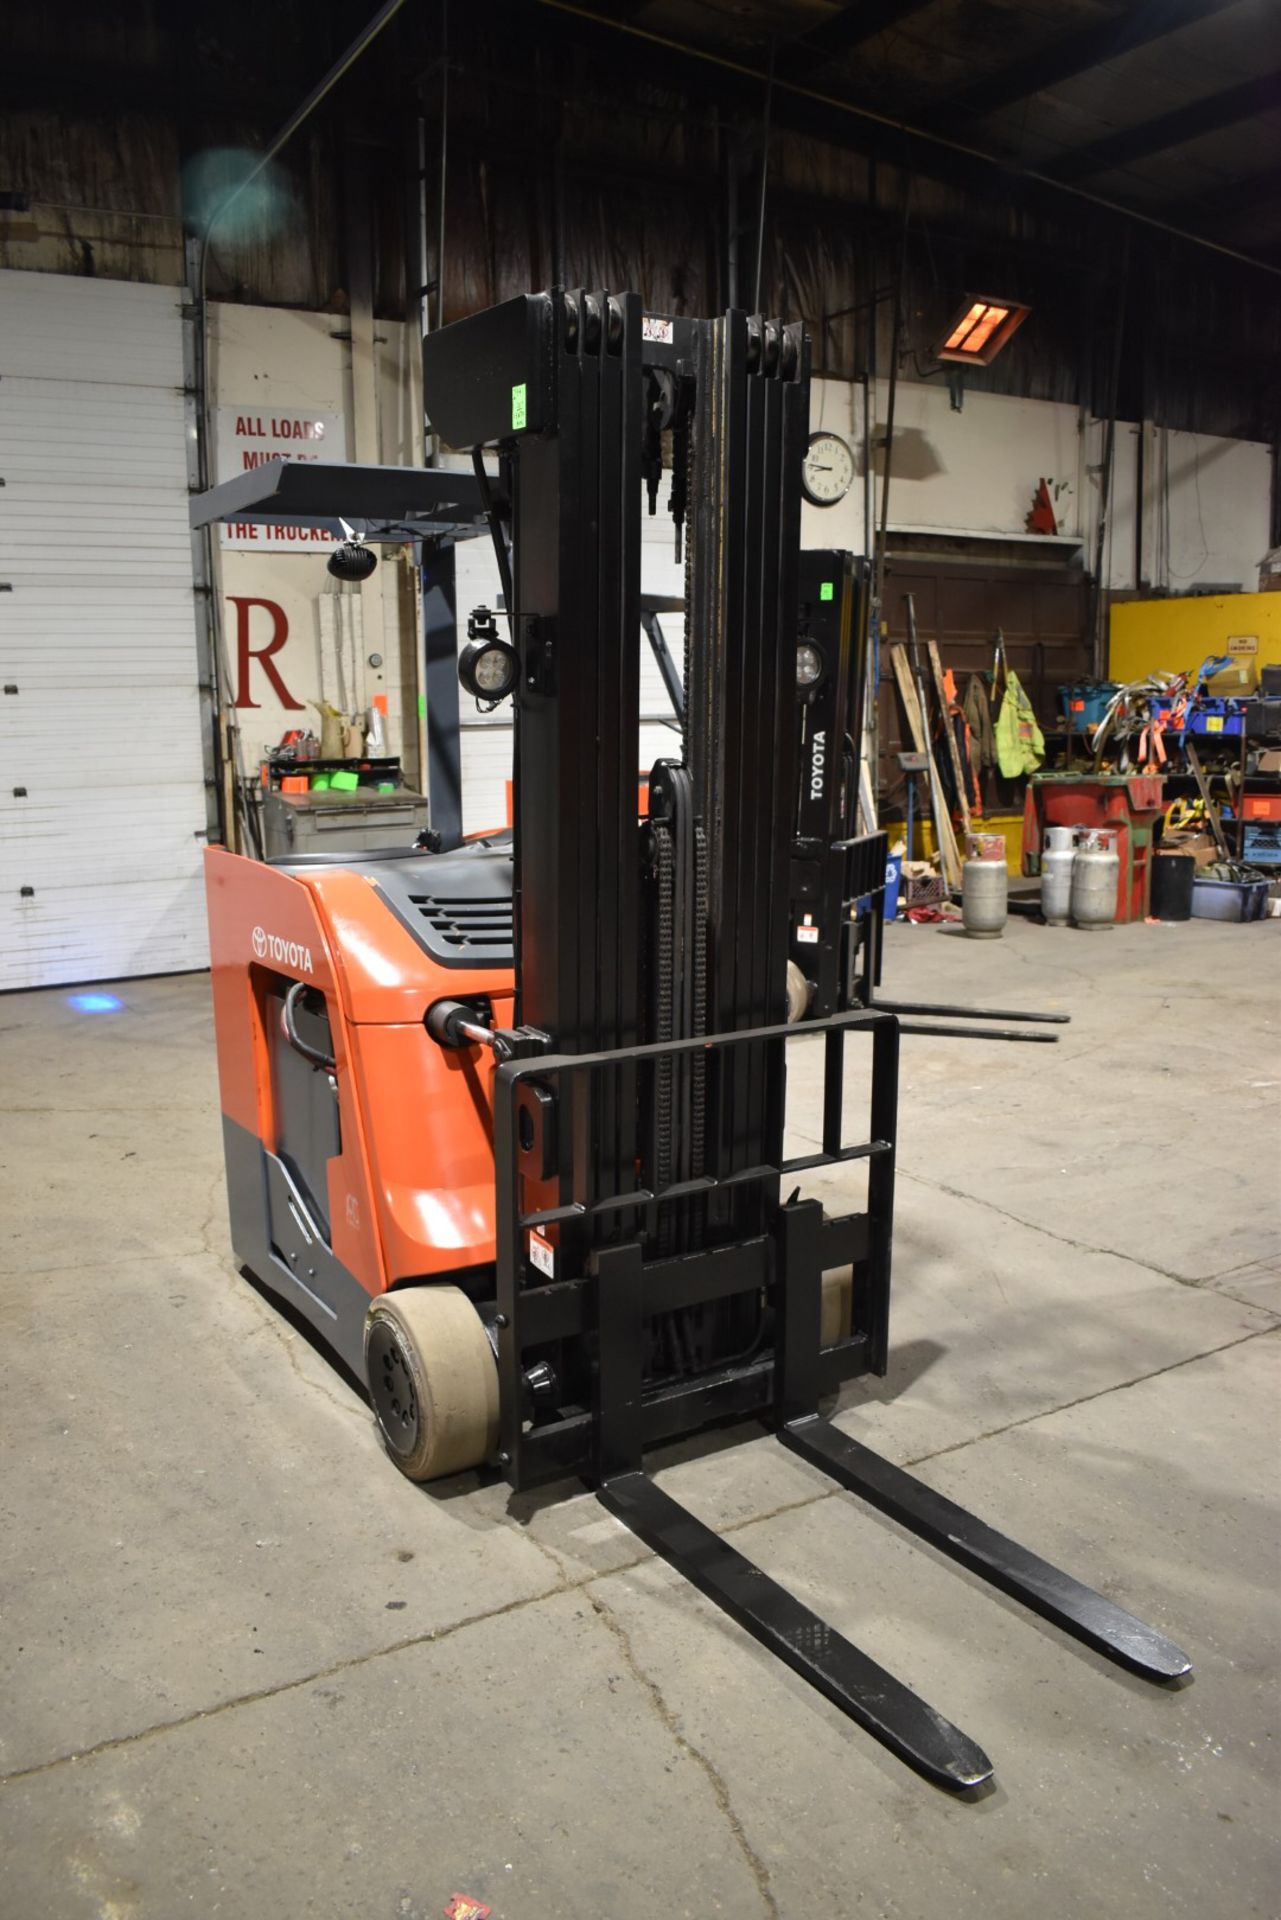 TOYOTA (2017) 8BNCU20 STAND ON ELECTRIC FORKLIFT WITH, 4,000LBS CAPACITY, 36V BATTERY, 276.5" MAX